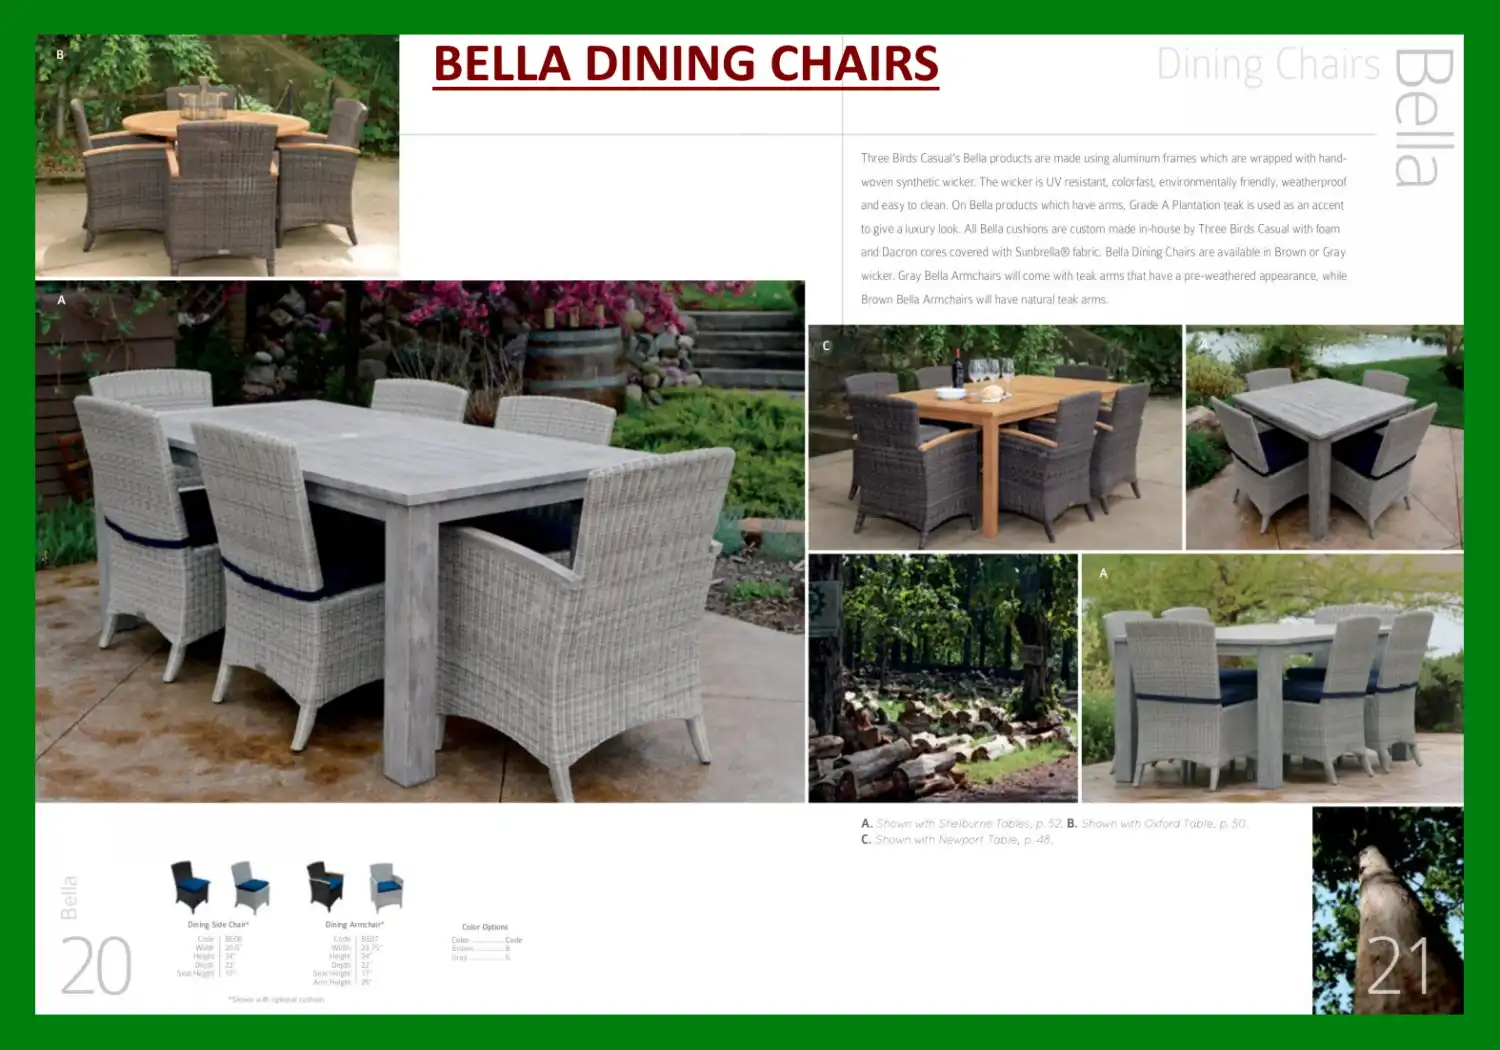 BELLA DINING CHAIRS